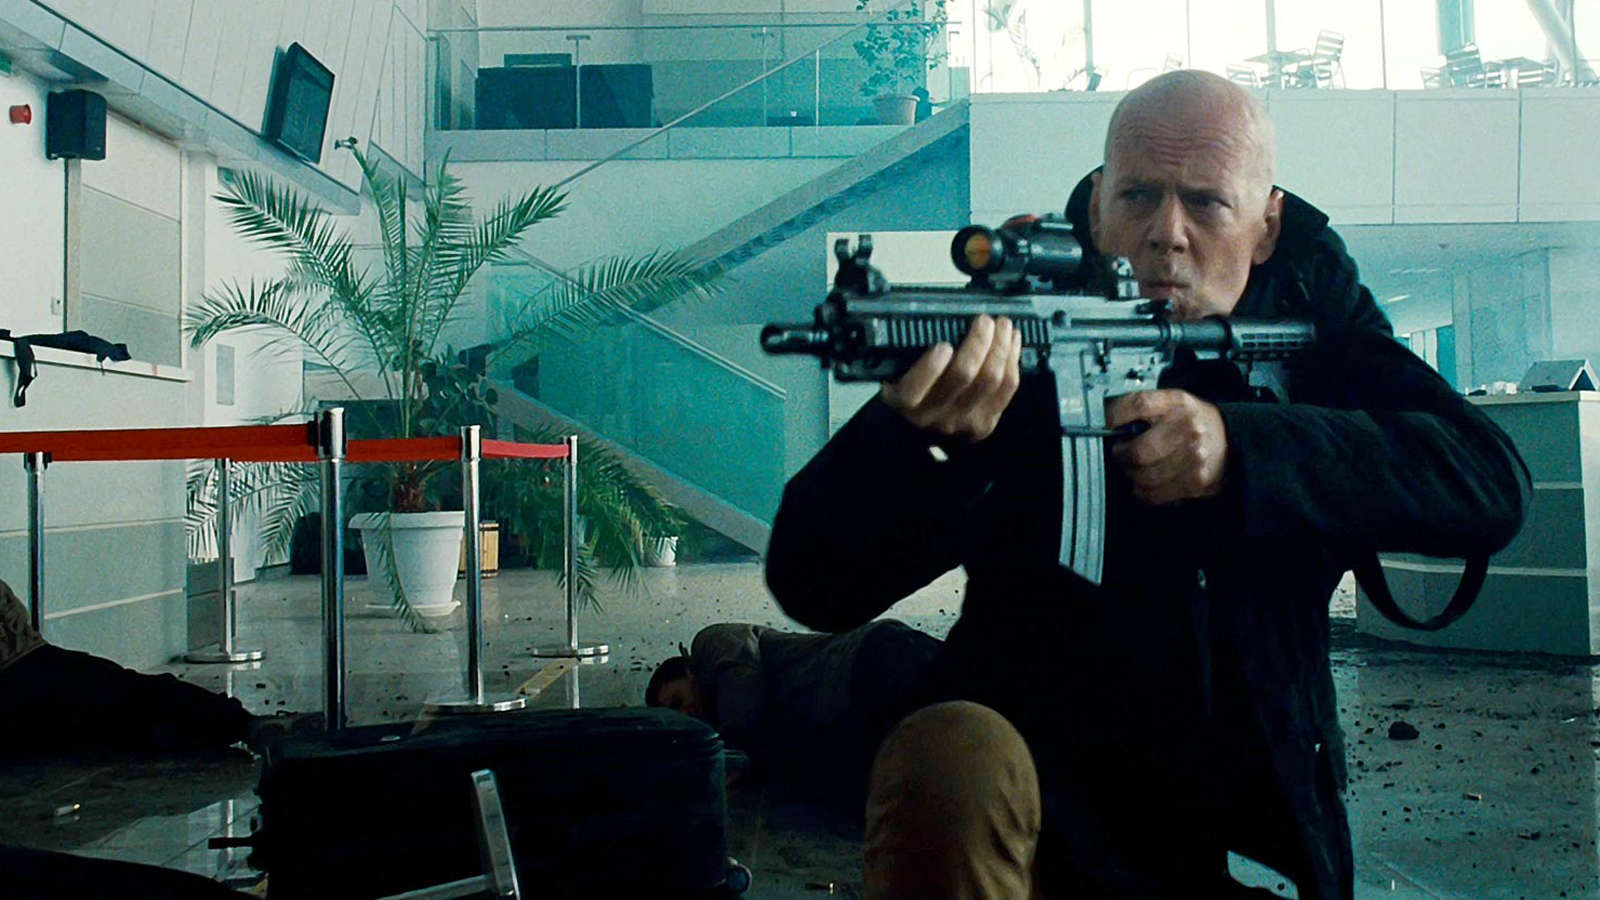 2012 The Expendables 2 敢死队2 高清壁纸5 - 1920x1200 壁纸下载 - 2012 The ...